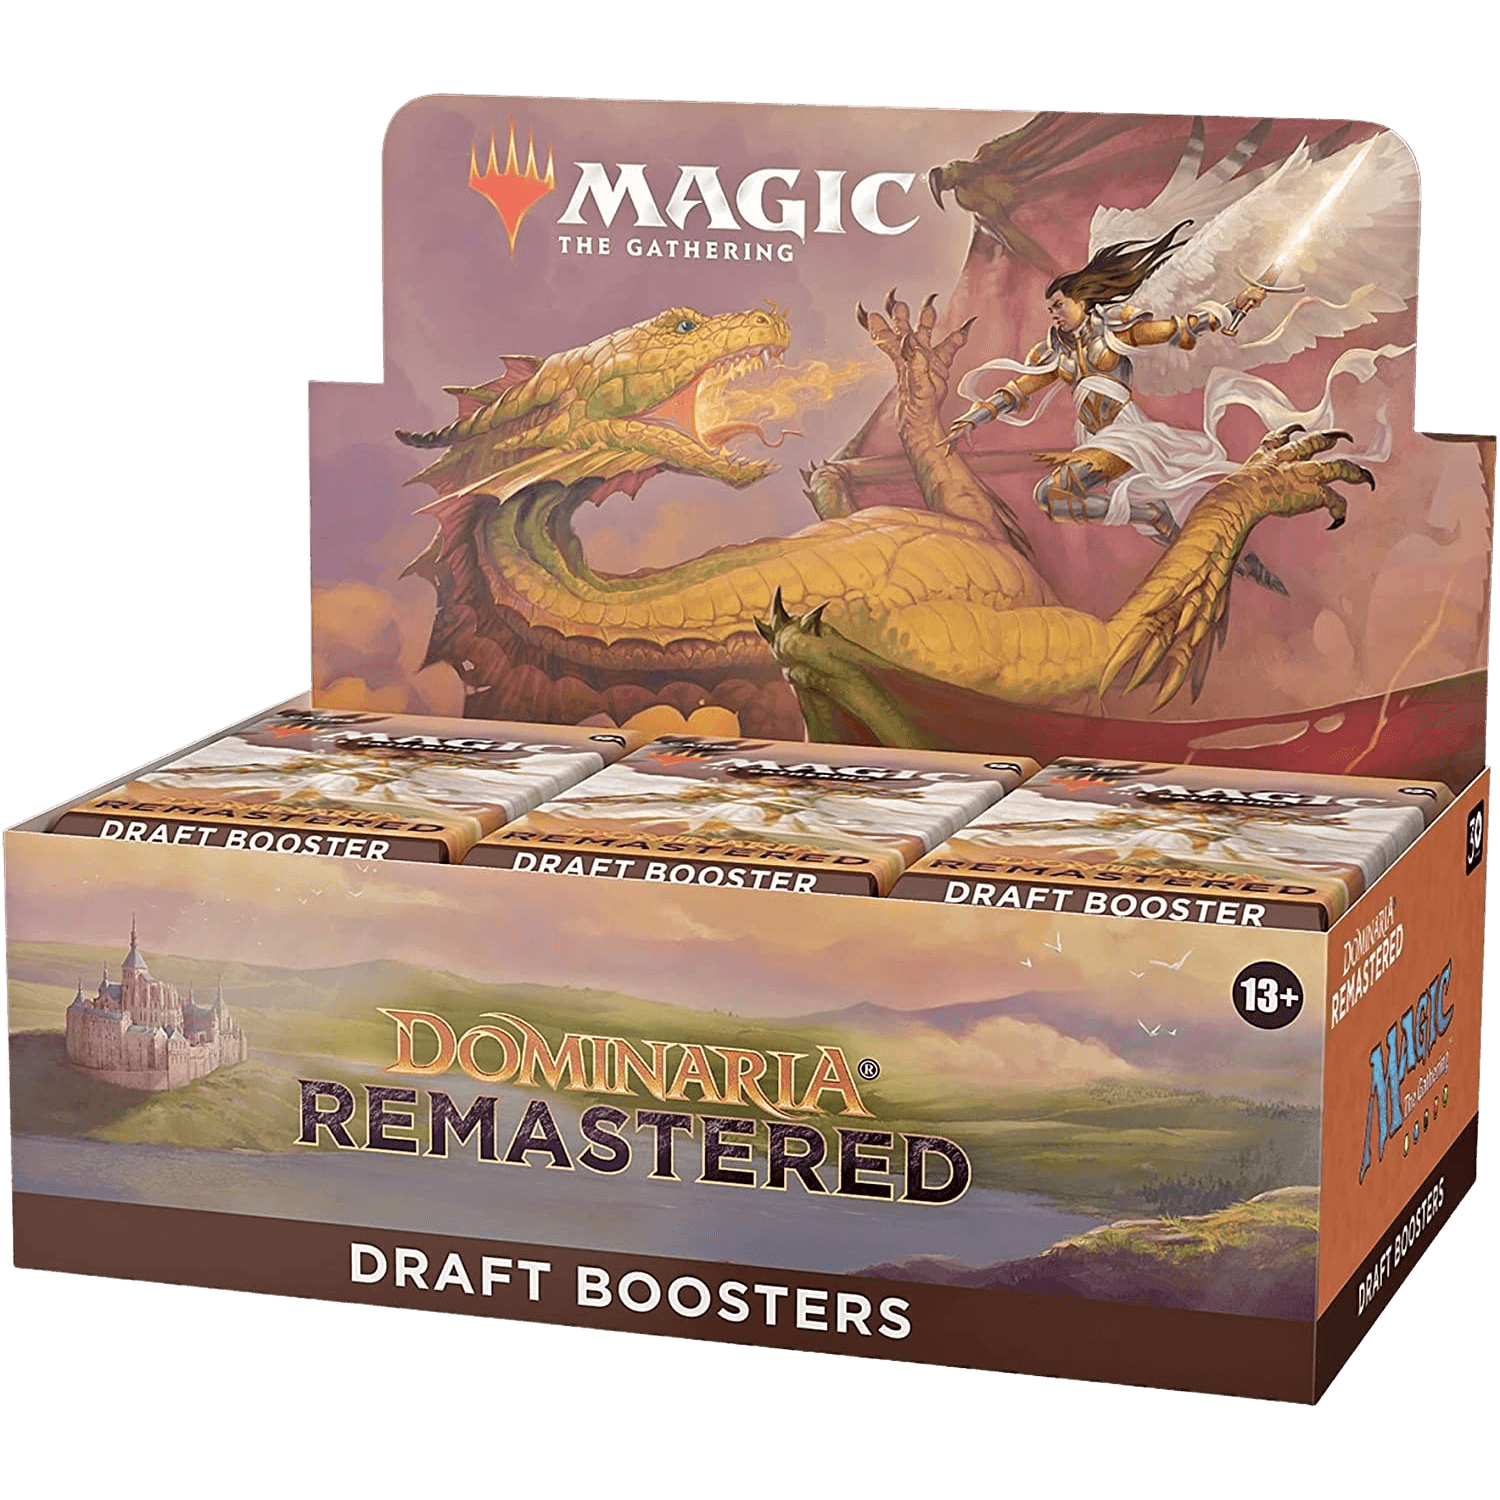 Magic: The Gathering - Dominaria Remastered Draft Booster Box (36 Packs) - The Card Vault